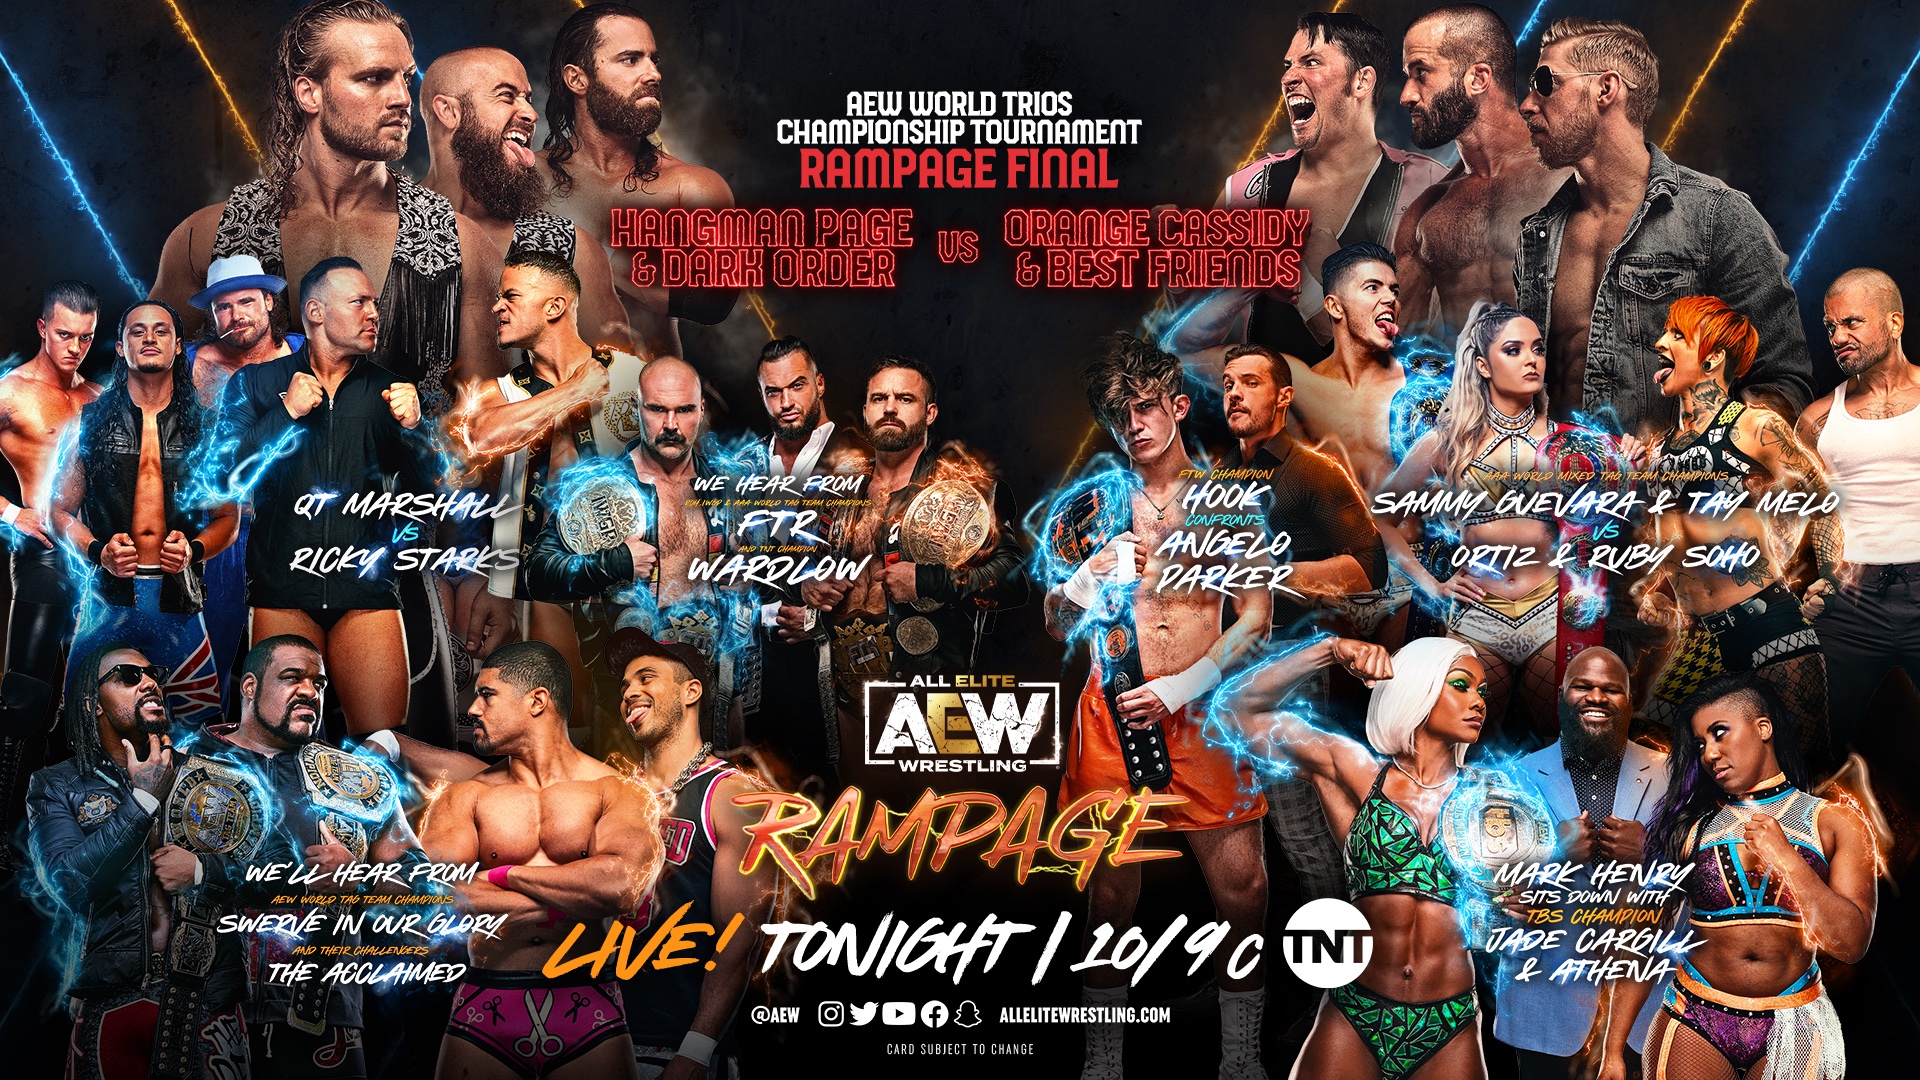 All Elite Wrestling returns with the latest edition of their weekly AEW Ram...